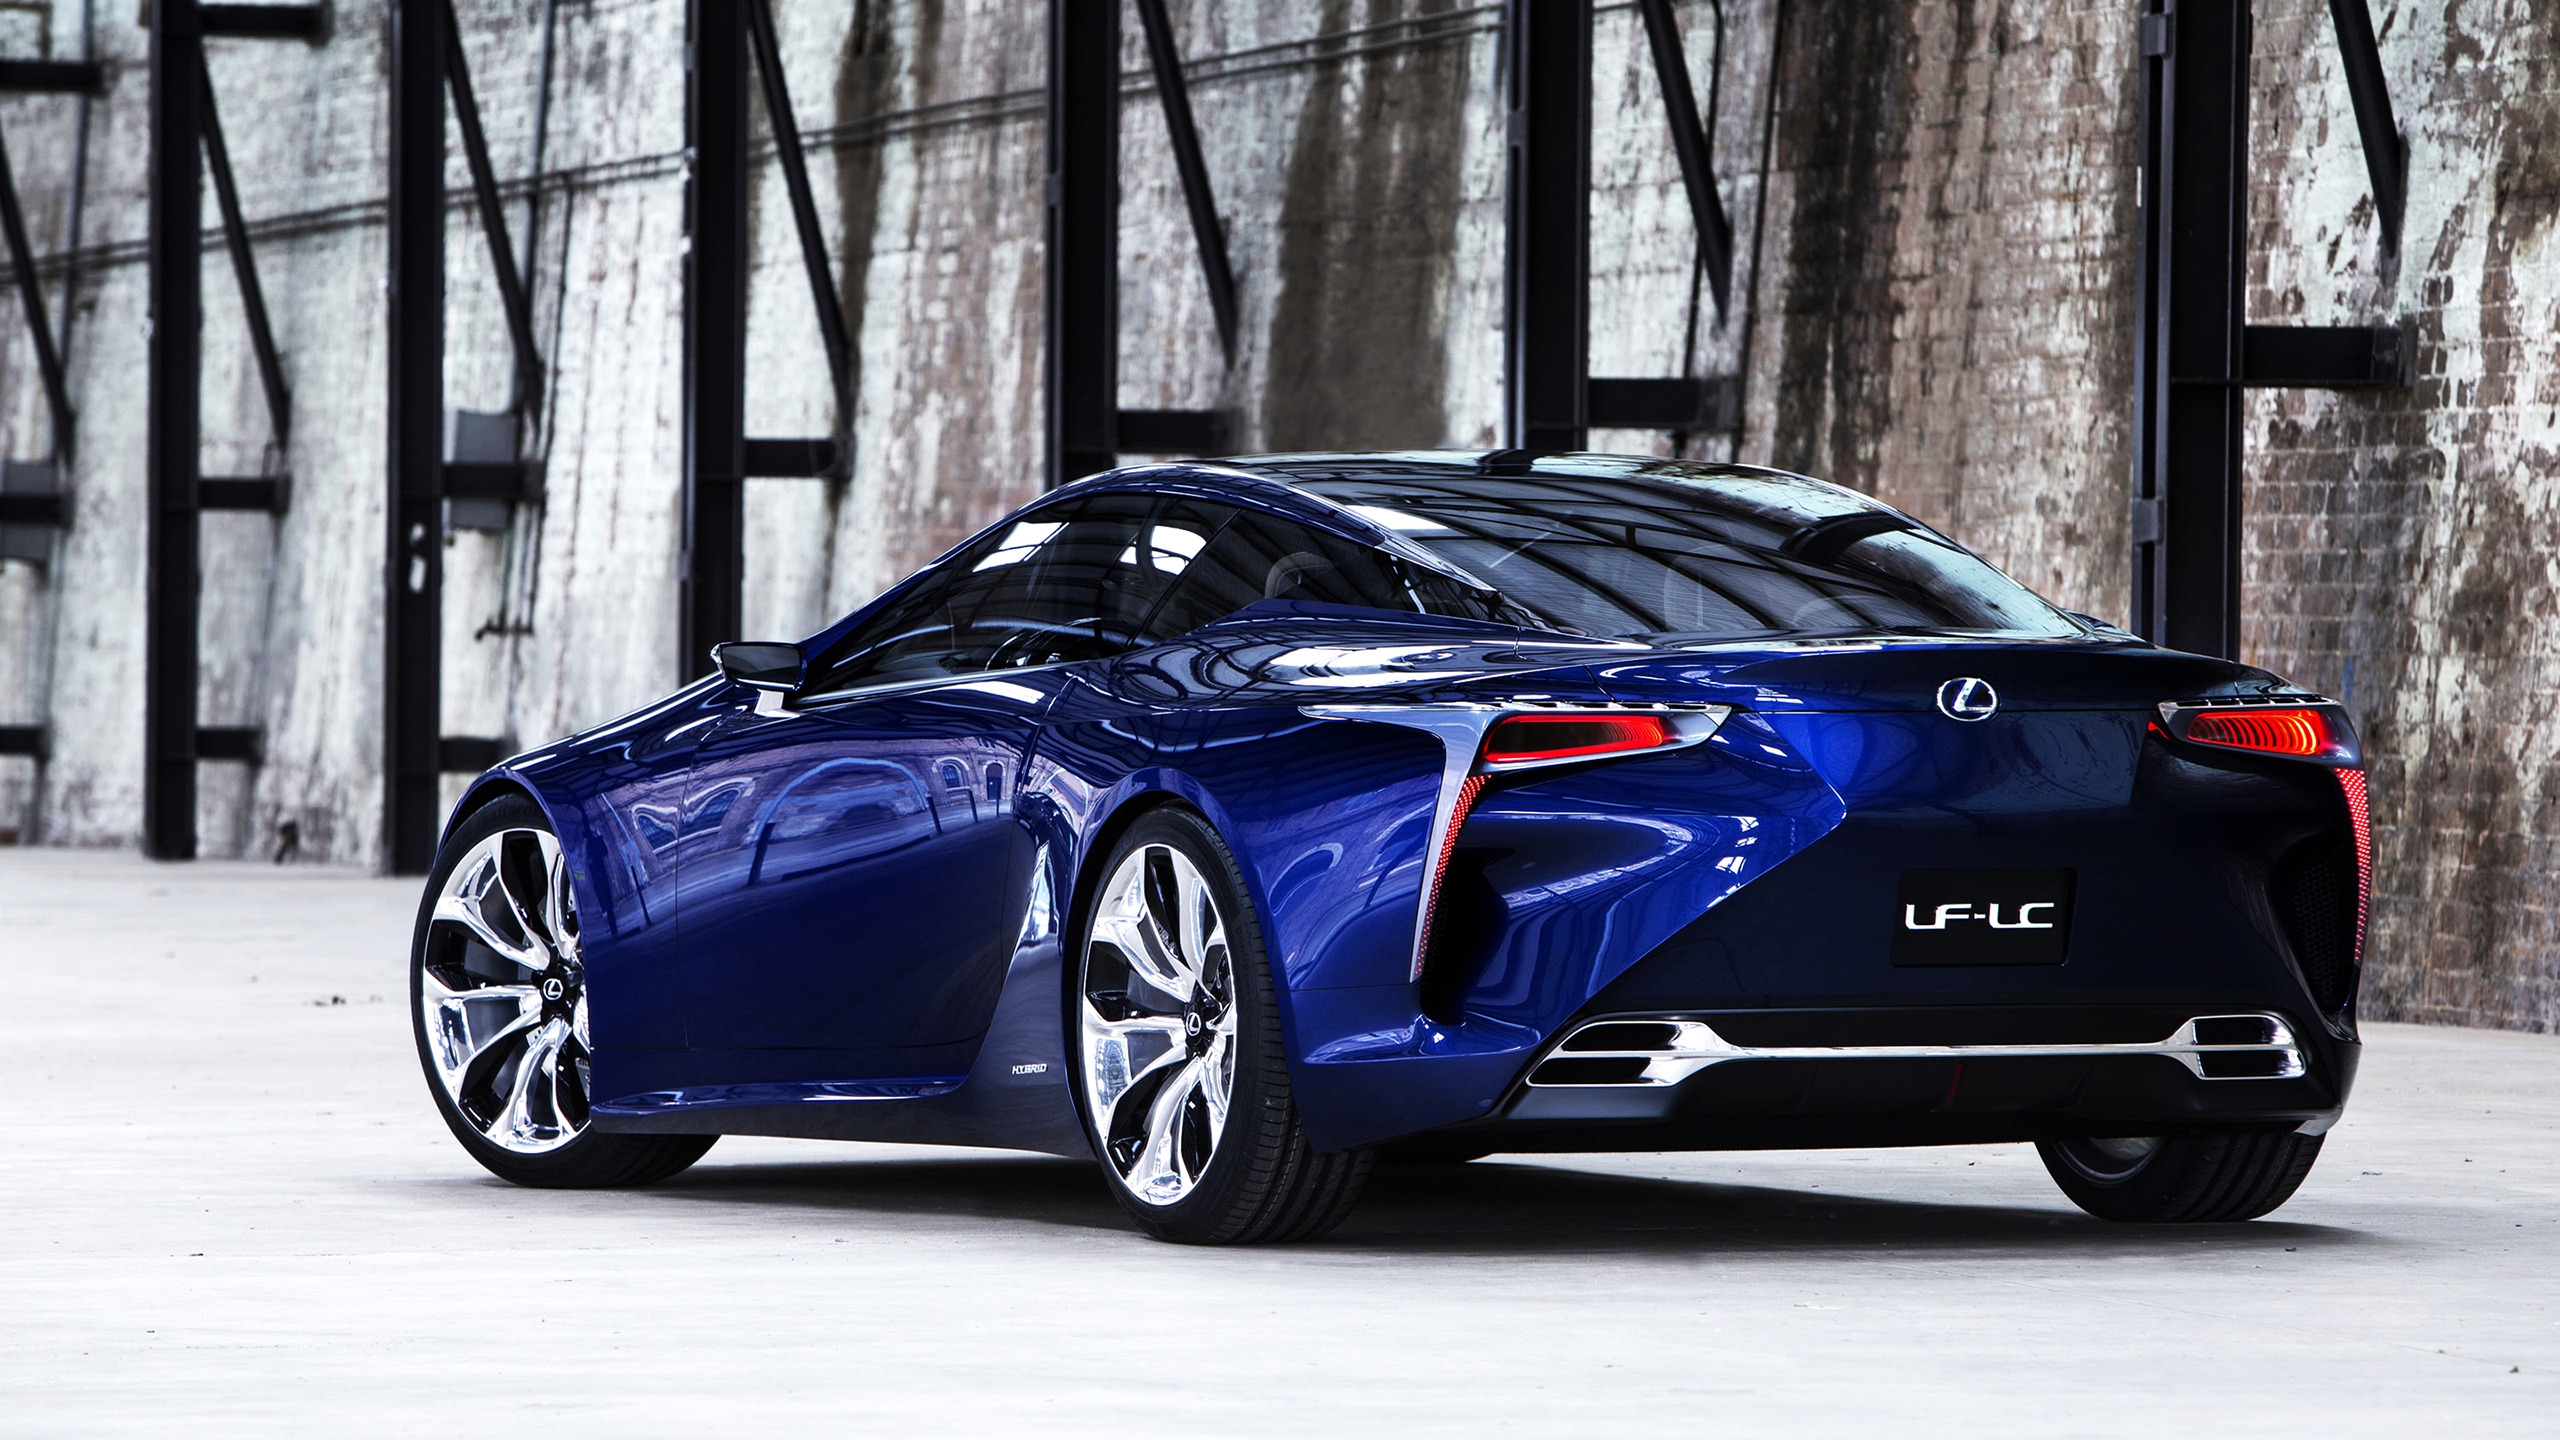 Rear Of Lexus LF-LC Concept for 2560x1440 HDTV resolution